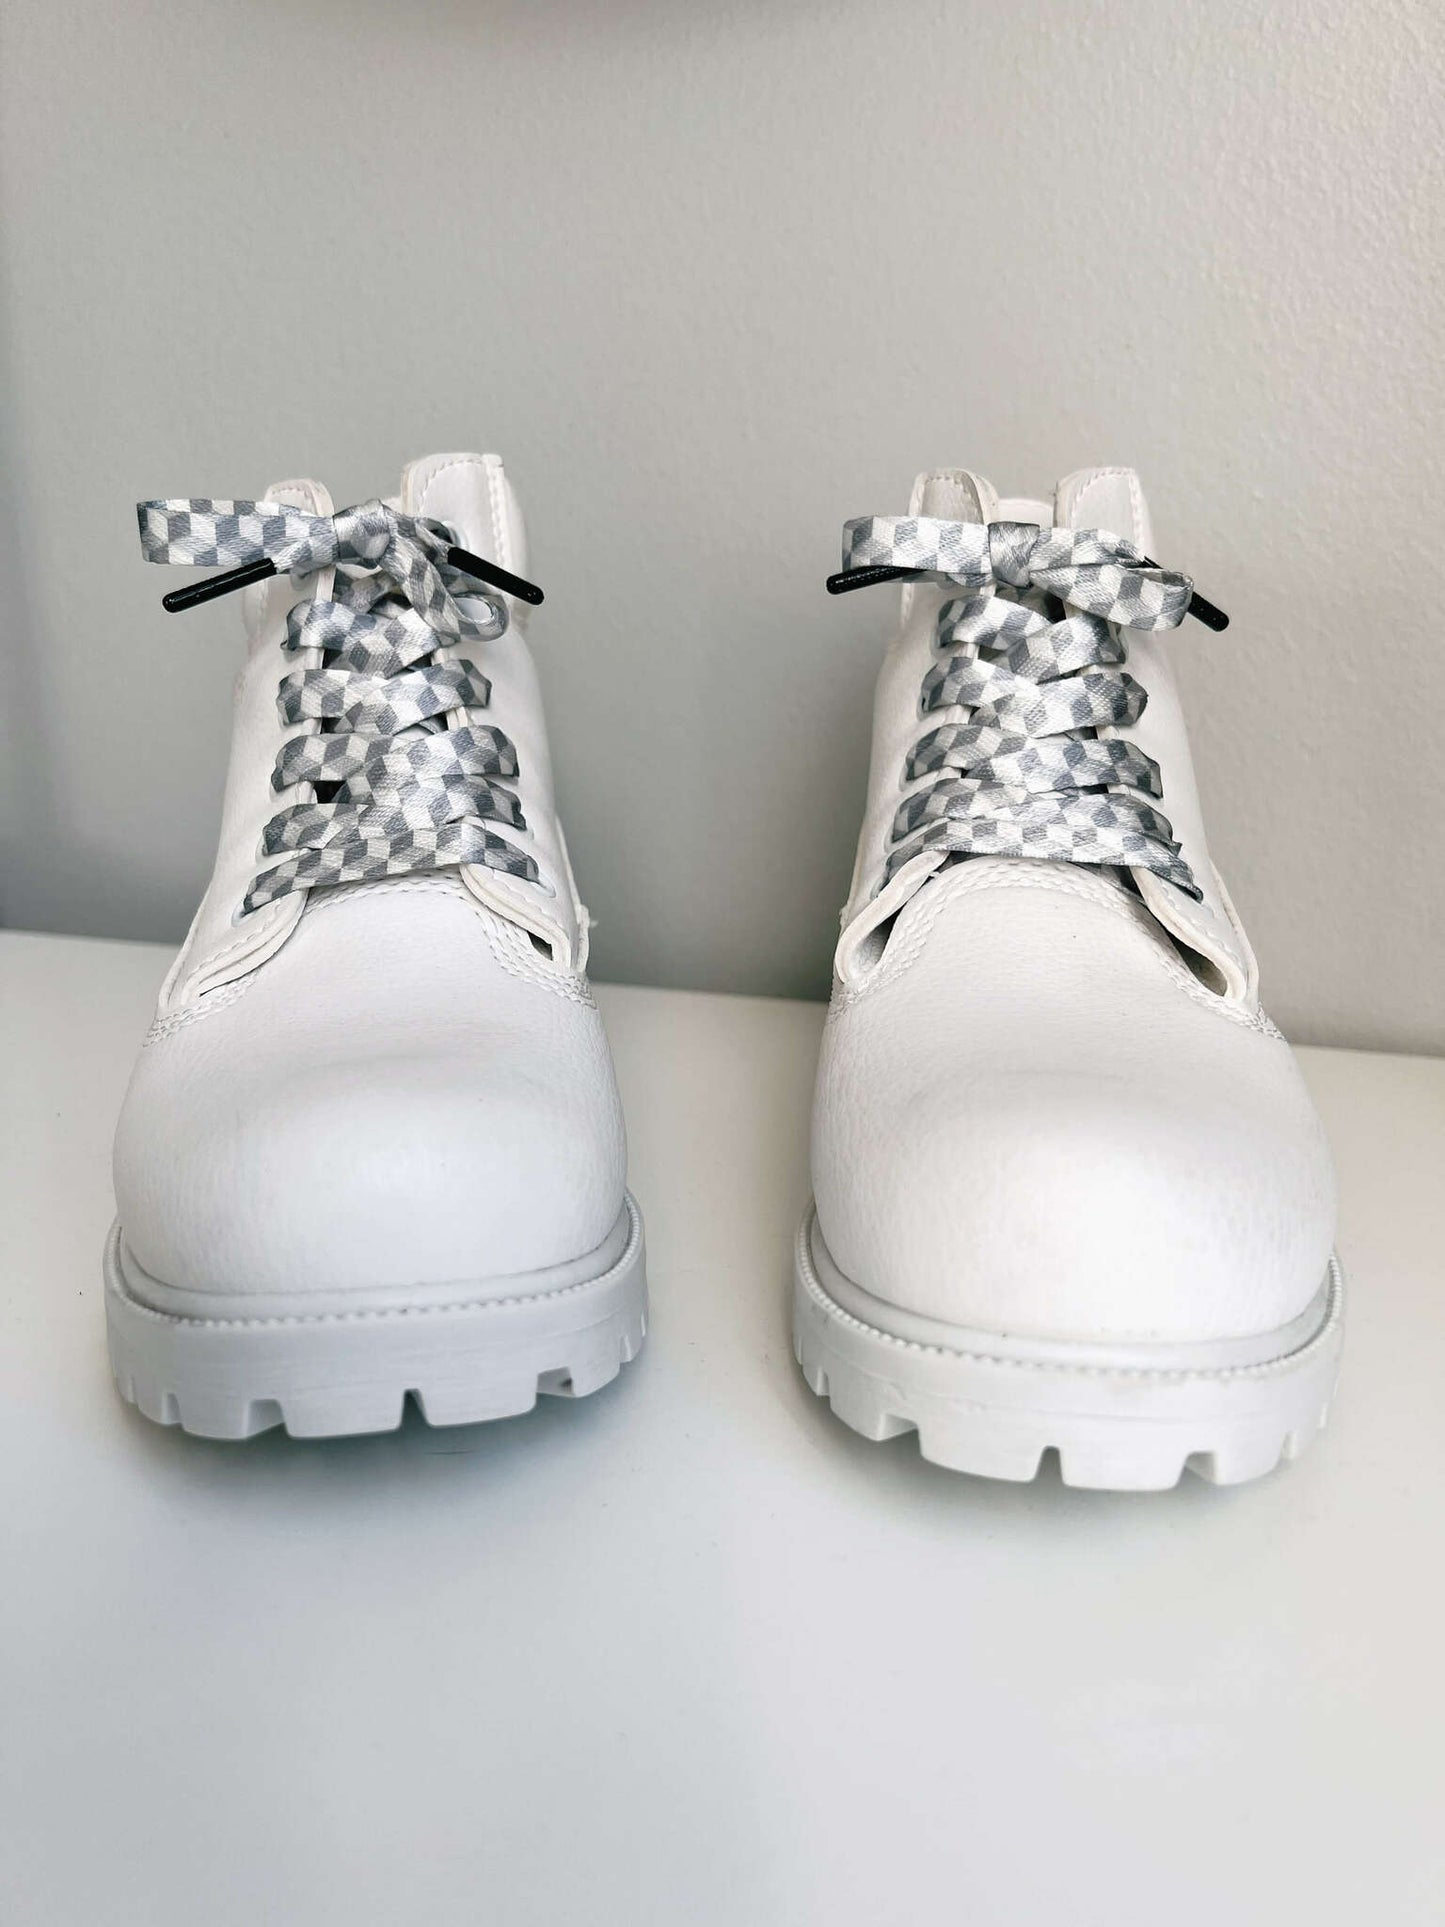 3D printed shoelaces - The Shoelace Brand